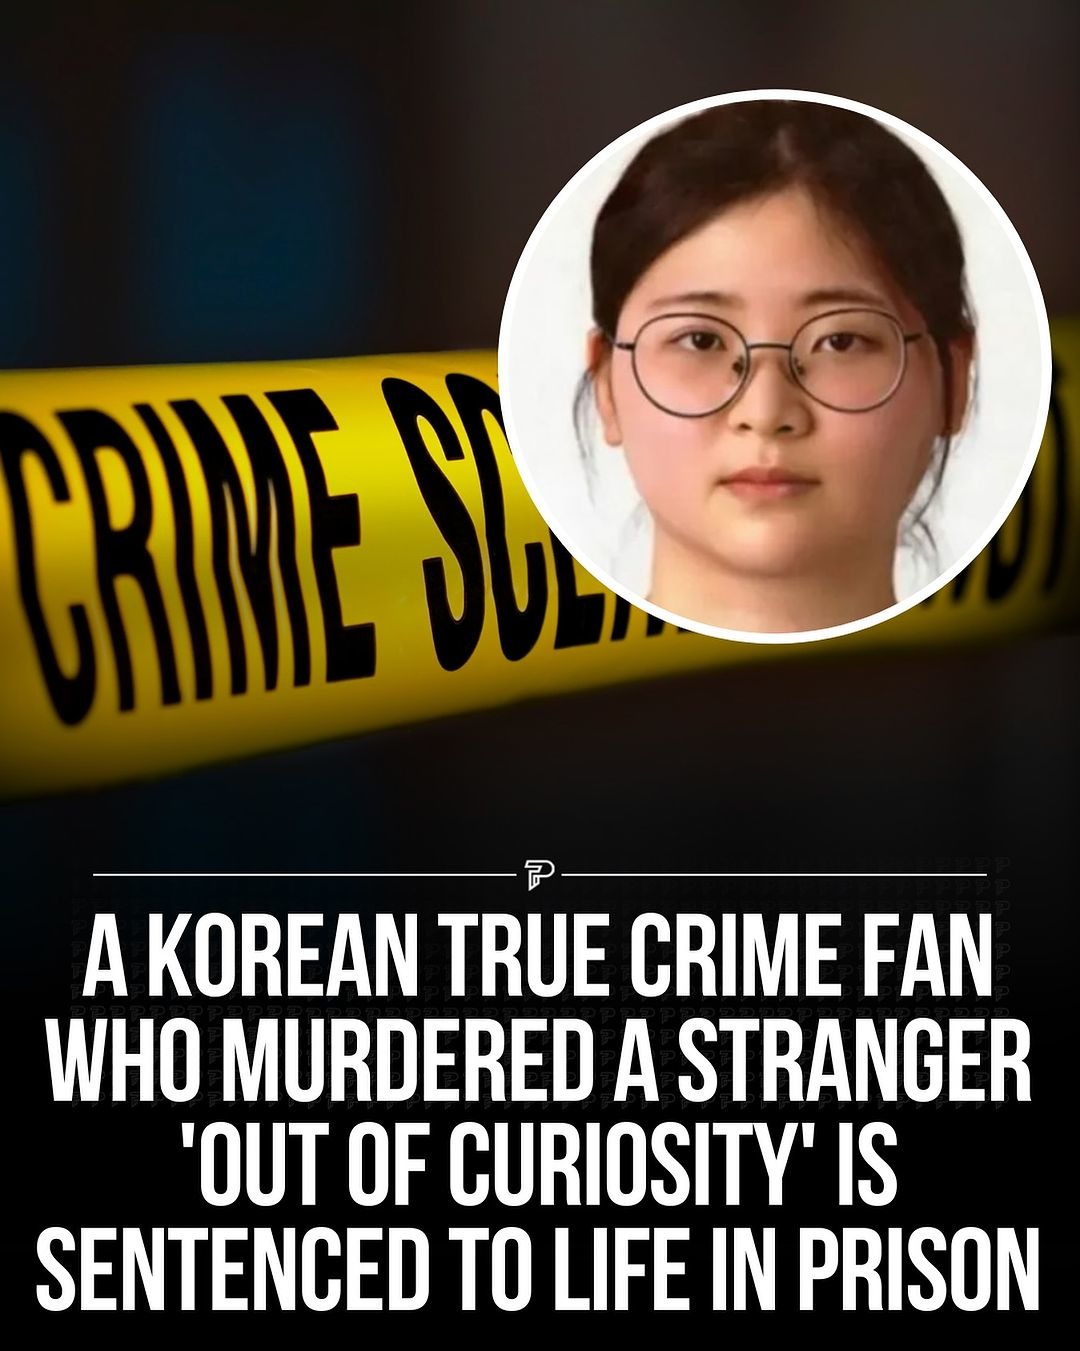 Jung Yoo-jung, 23, reportedly stabbed a 26-year-old over 100 times in the victim's home in Busan. Prosecutors had requested that Jung receive the death penalty. - meme